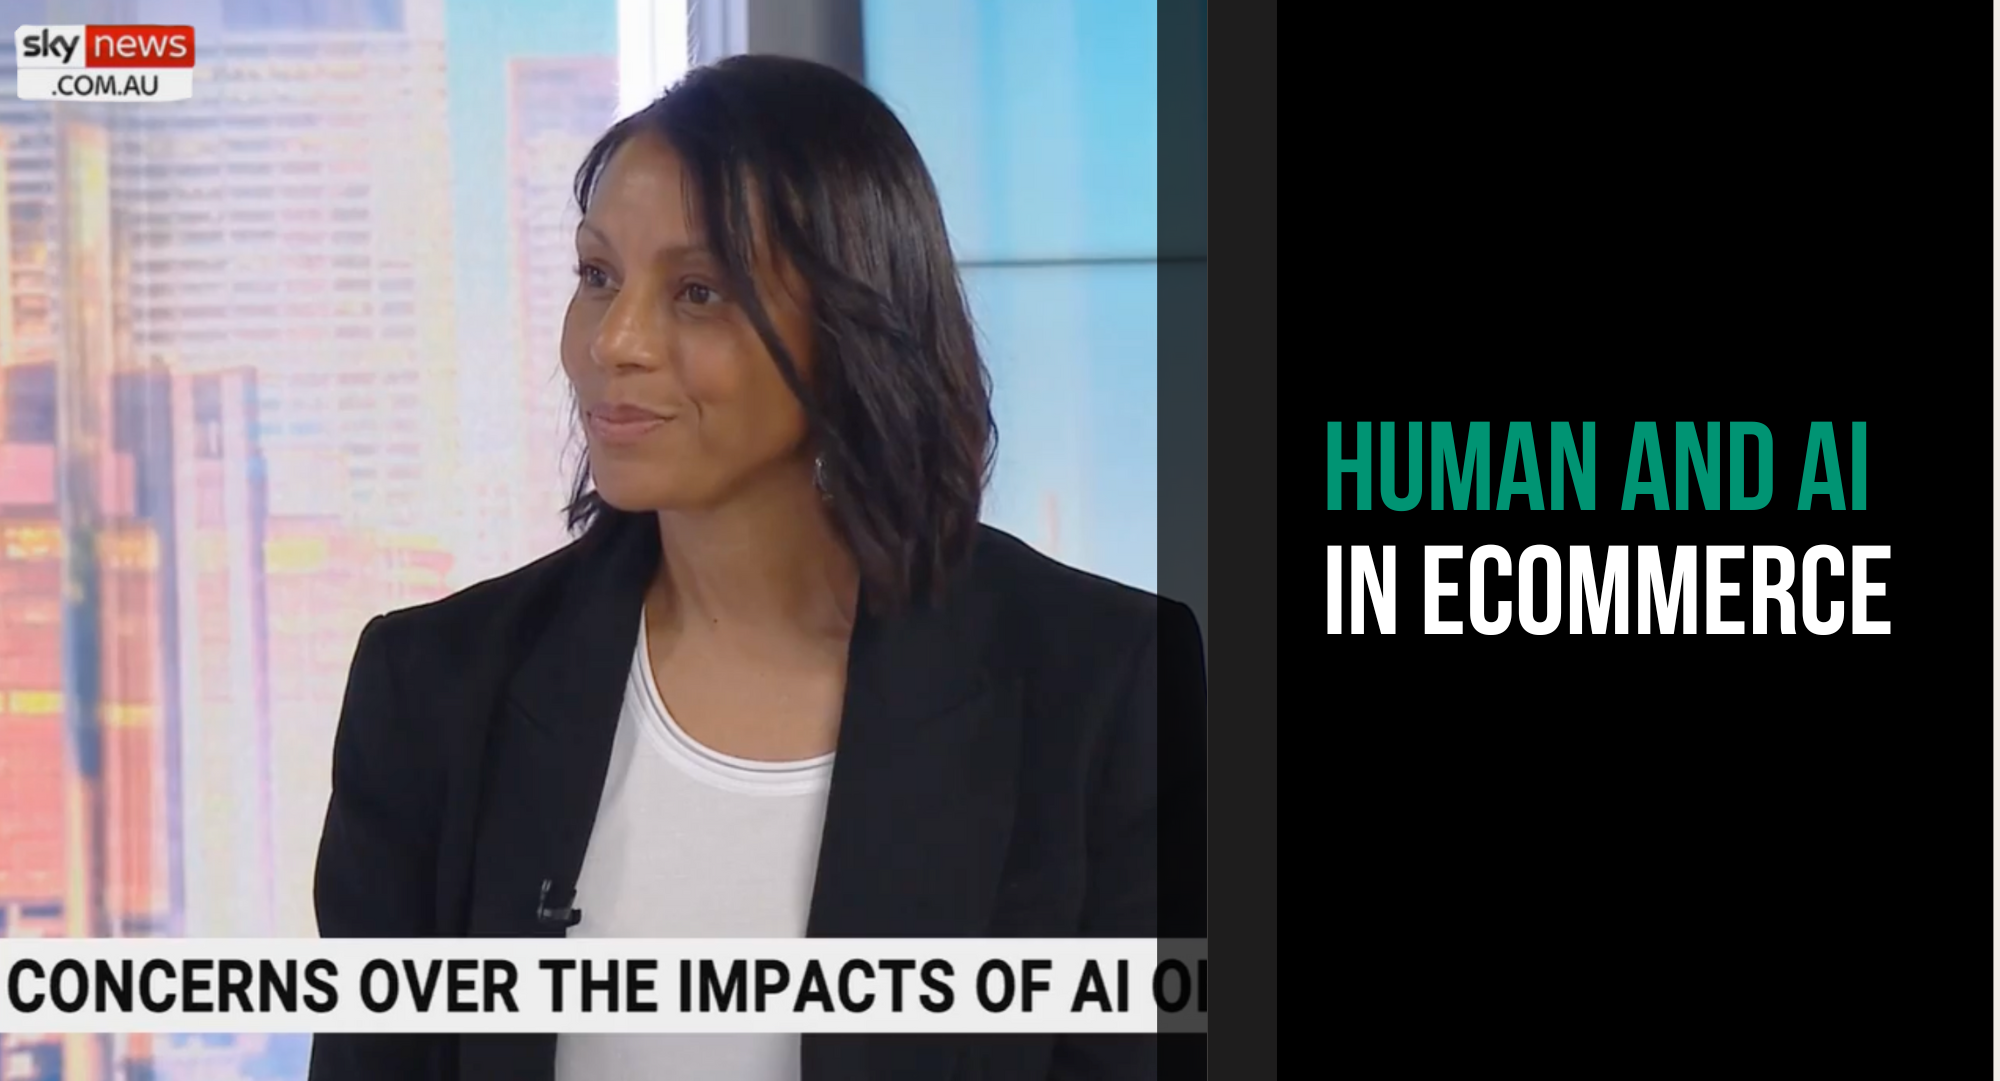 Human and AI in Ecommerce